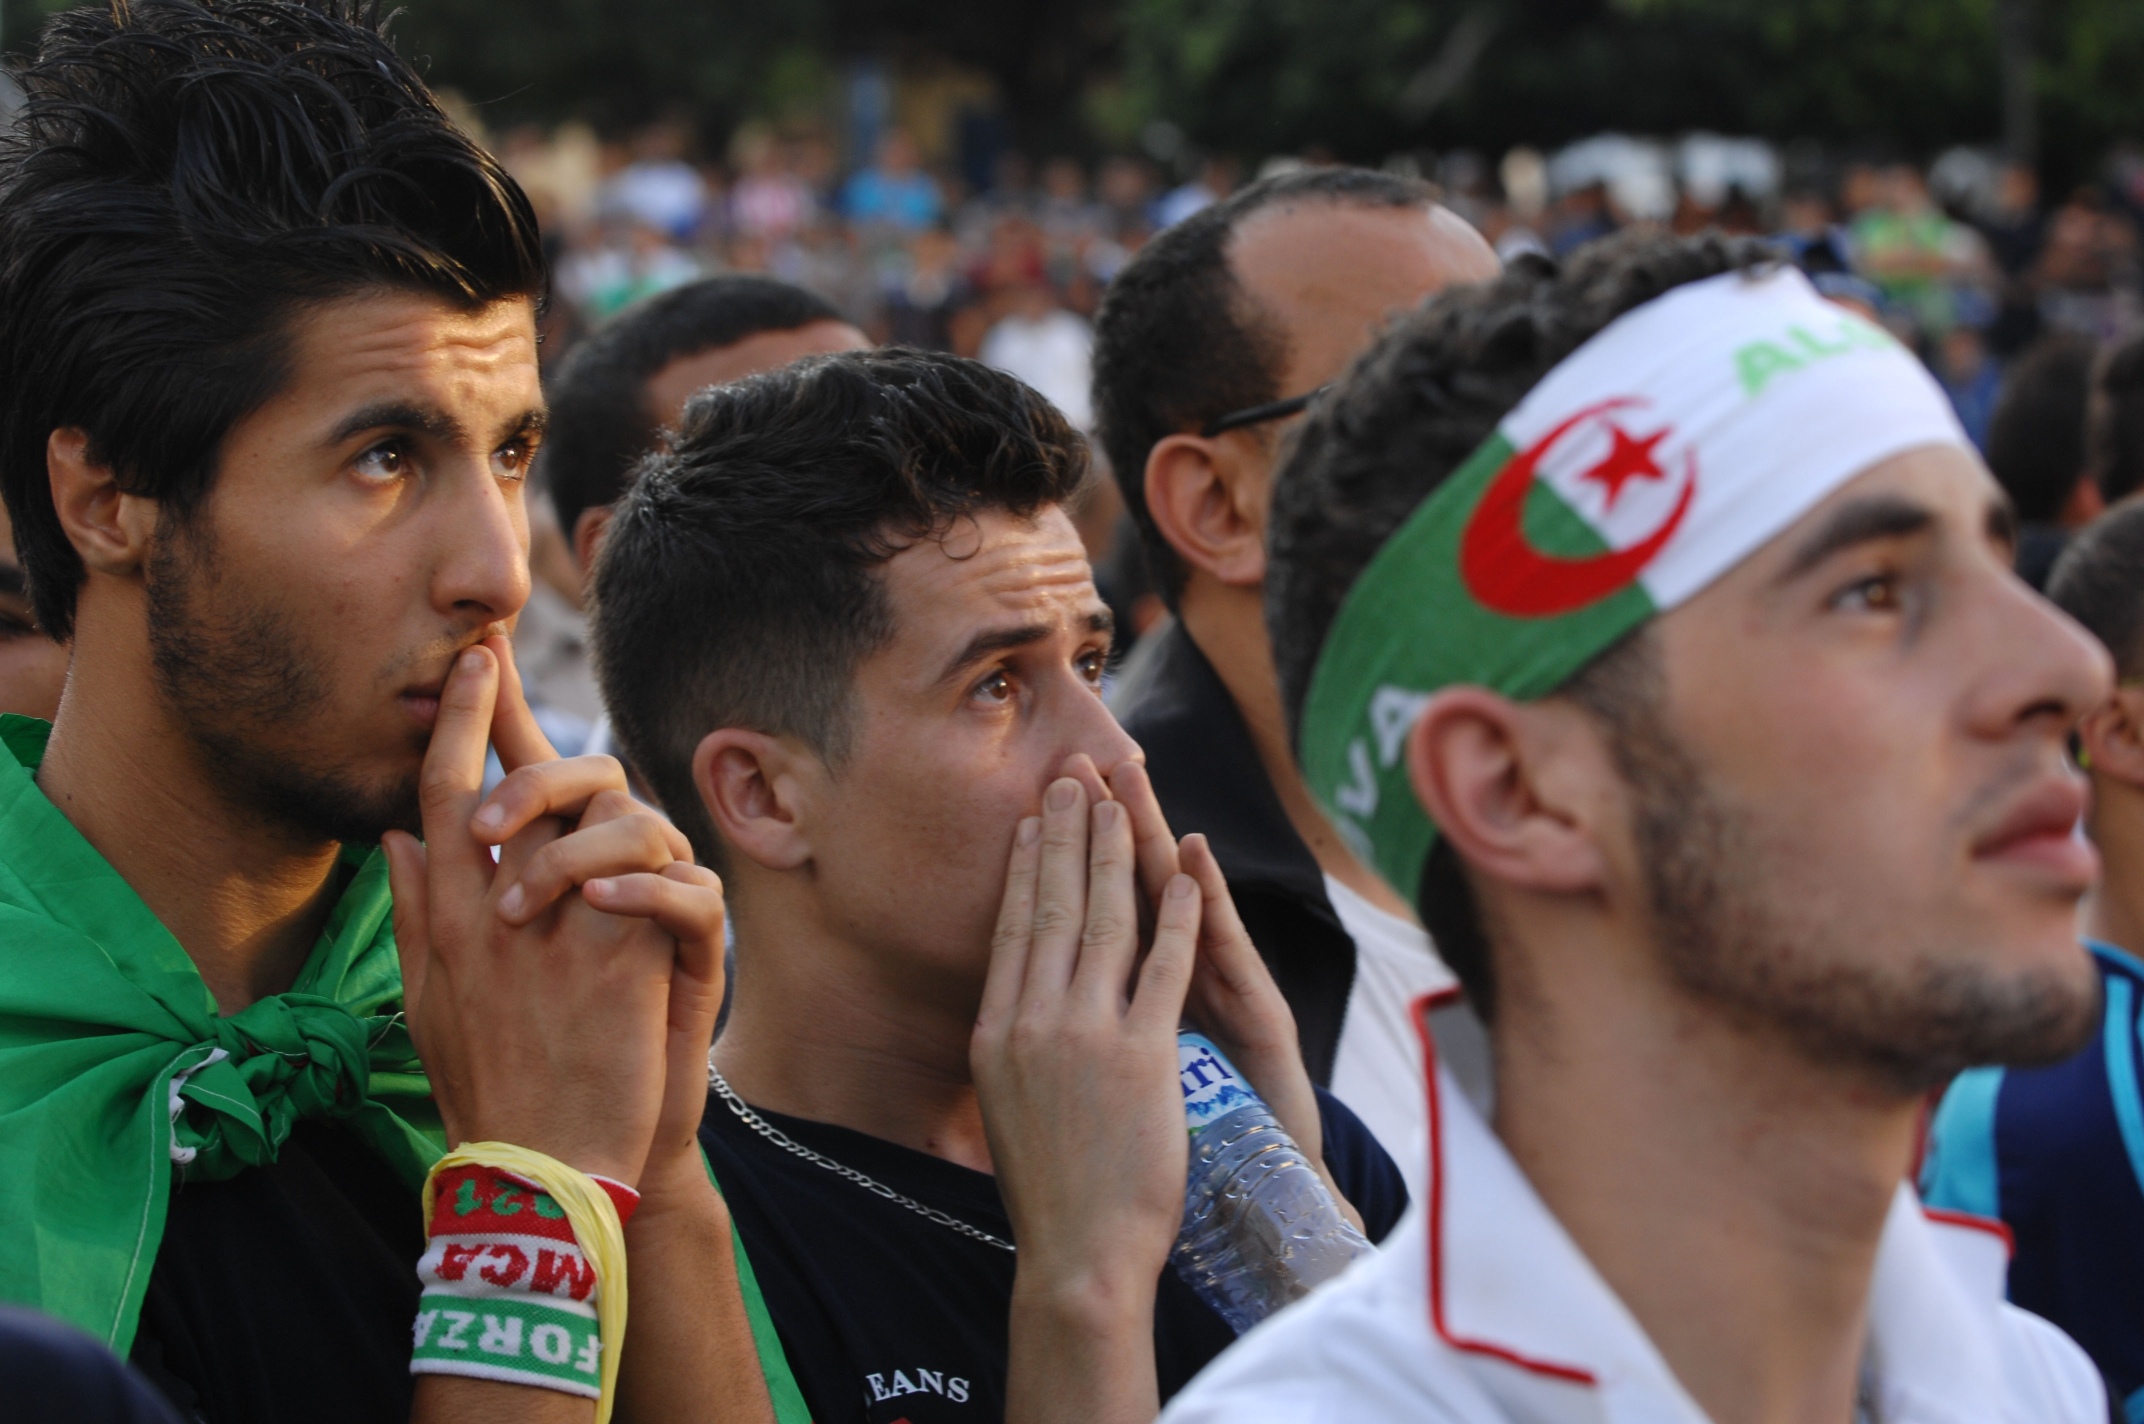 Algeria fans look stony-faced during their team's 2-1 loss to Belgium. Photo: AP